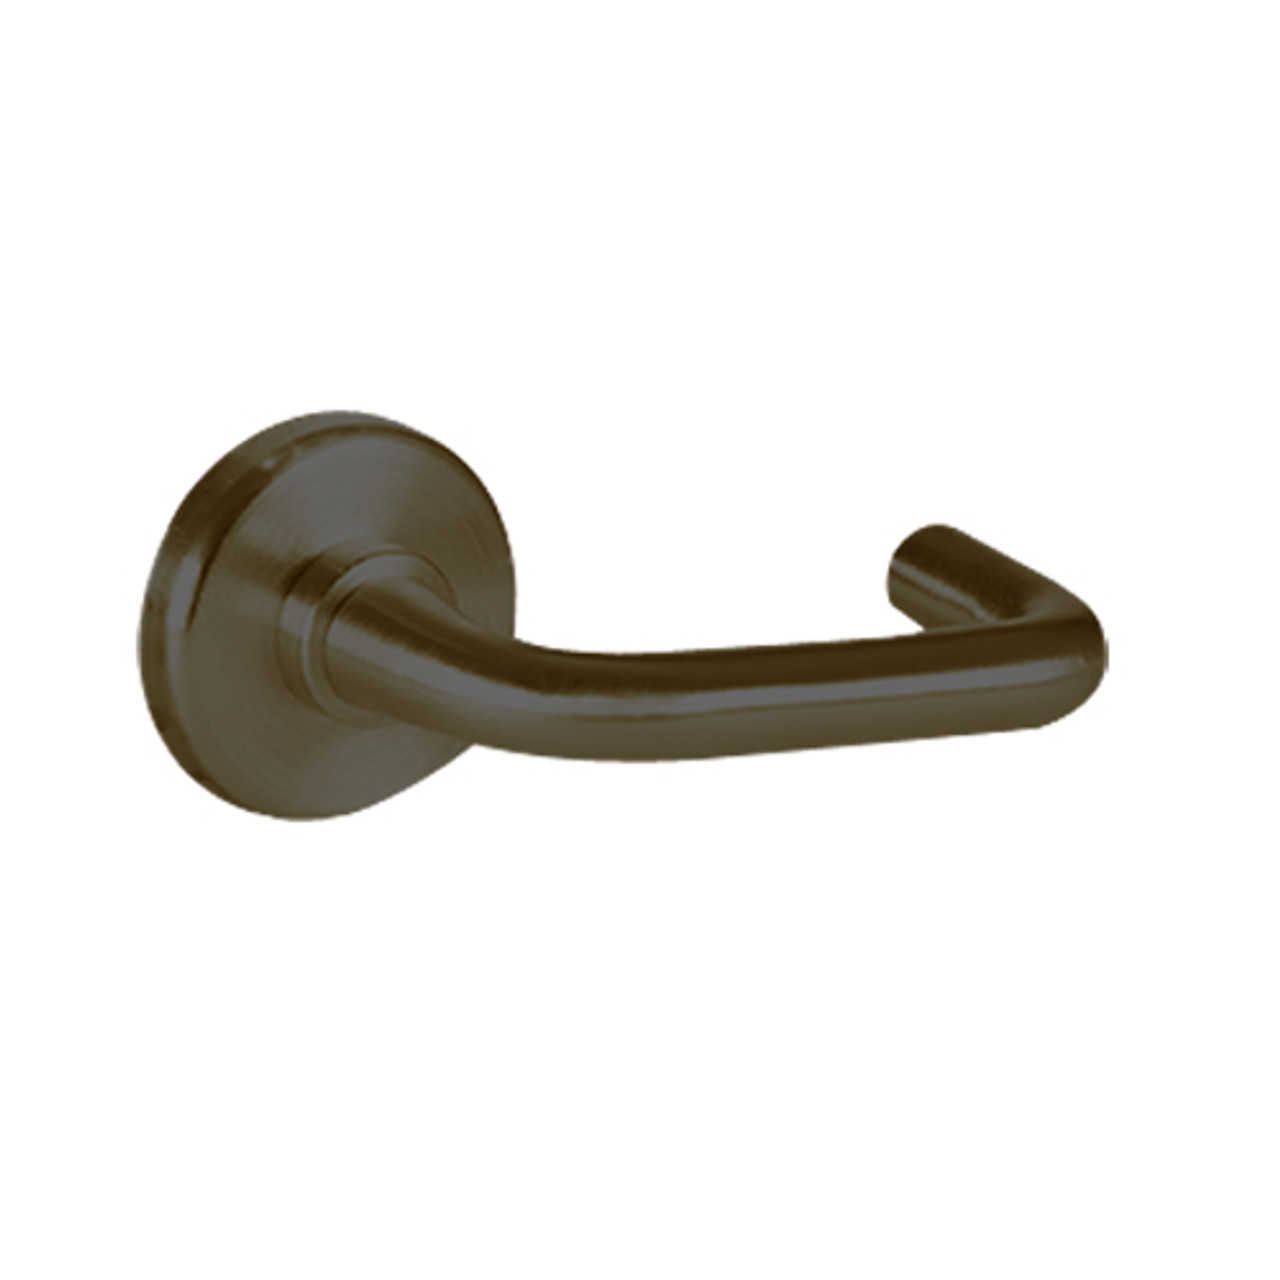 45H7W3S613 Best 40H Series Storeroom without Deadbolt Heavy Duty Mortise Lever Lock with Solid Tube Return Style in Oil Rubbed Bronze